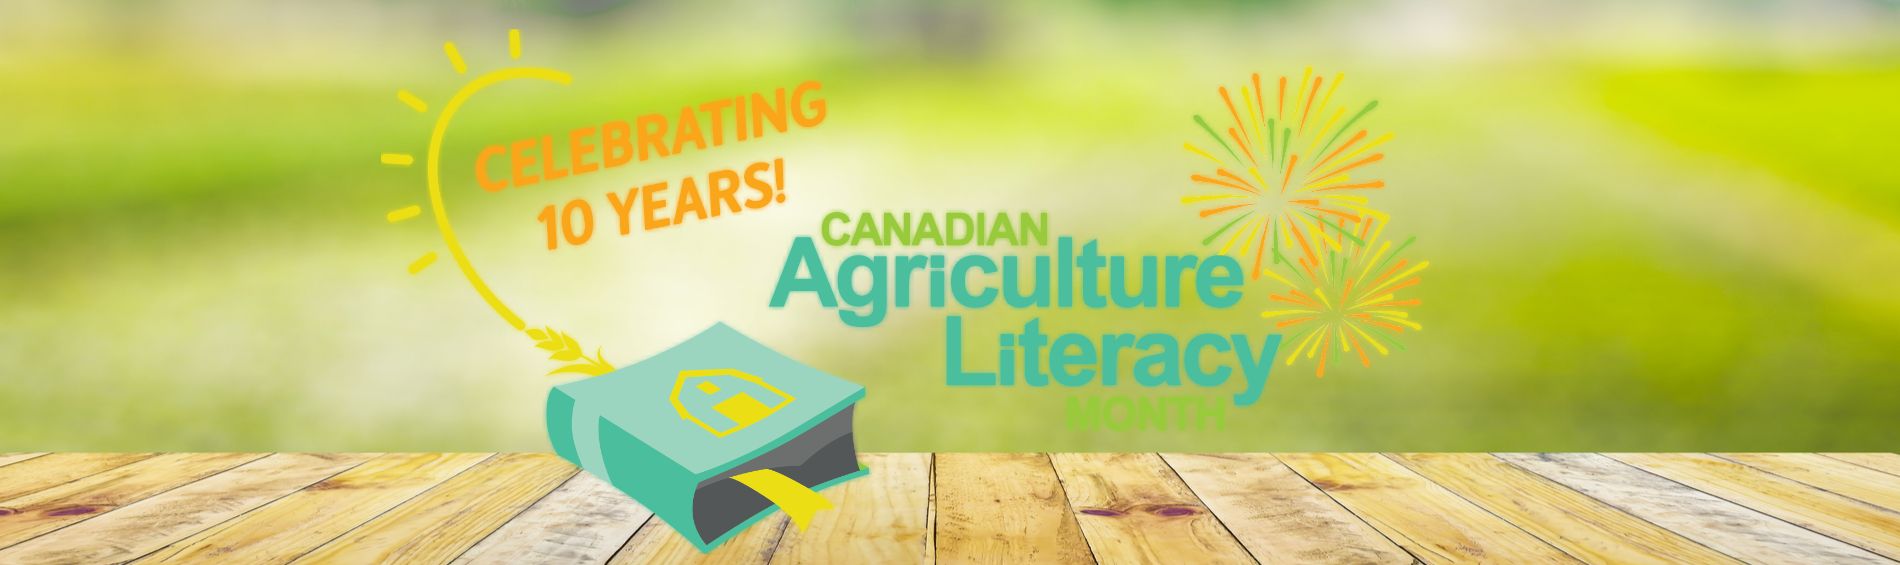 Canadian Agriculture Literacy Month 2021